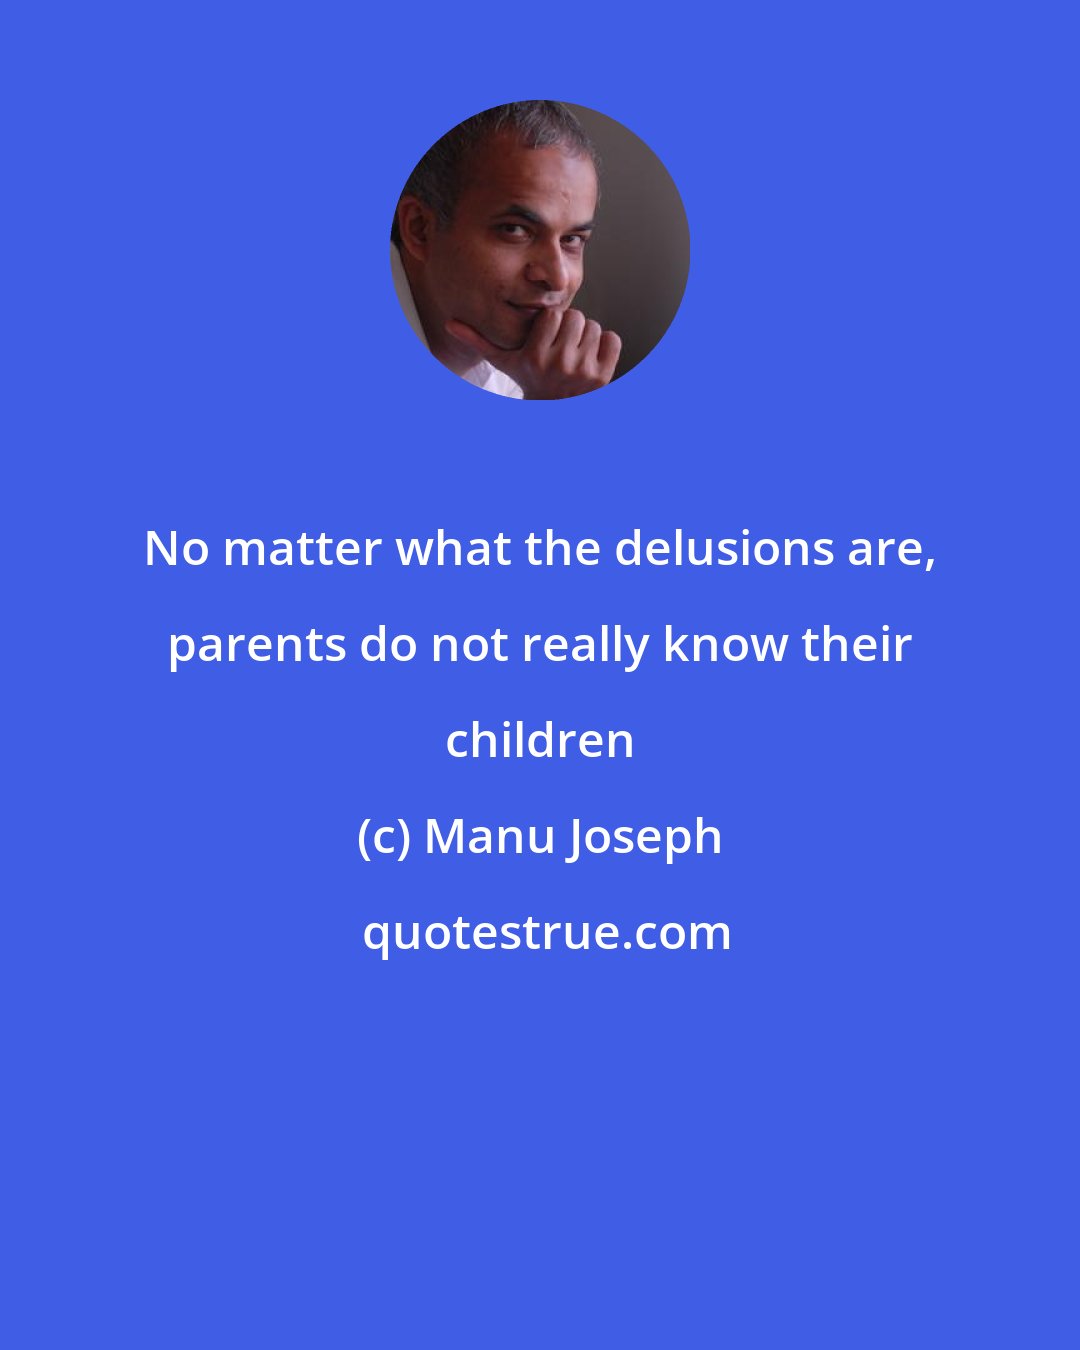 Manu Joseph: No matter what the delusions are, parents do not really know their children